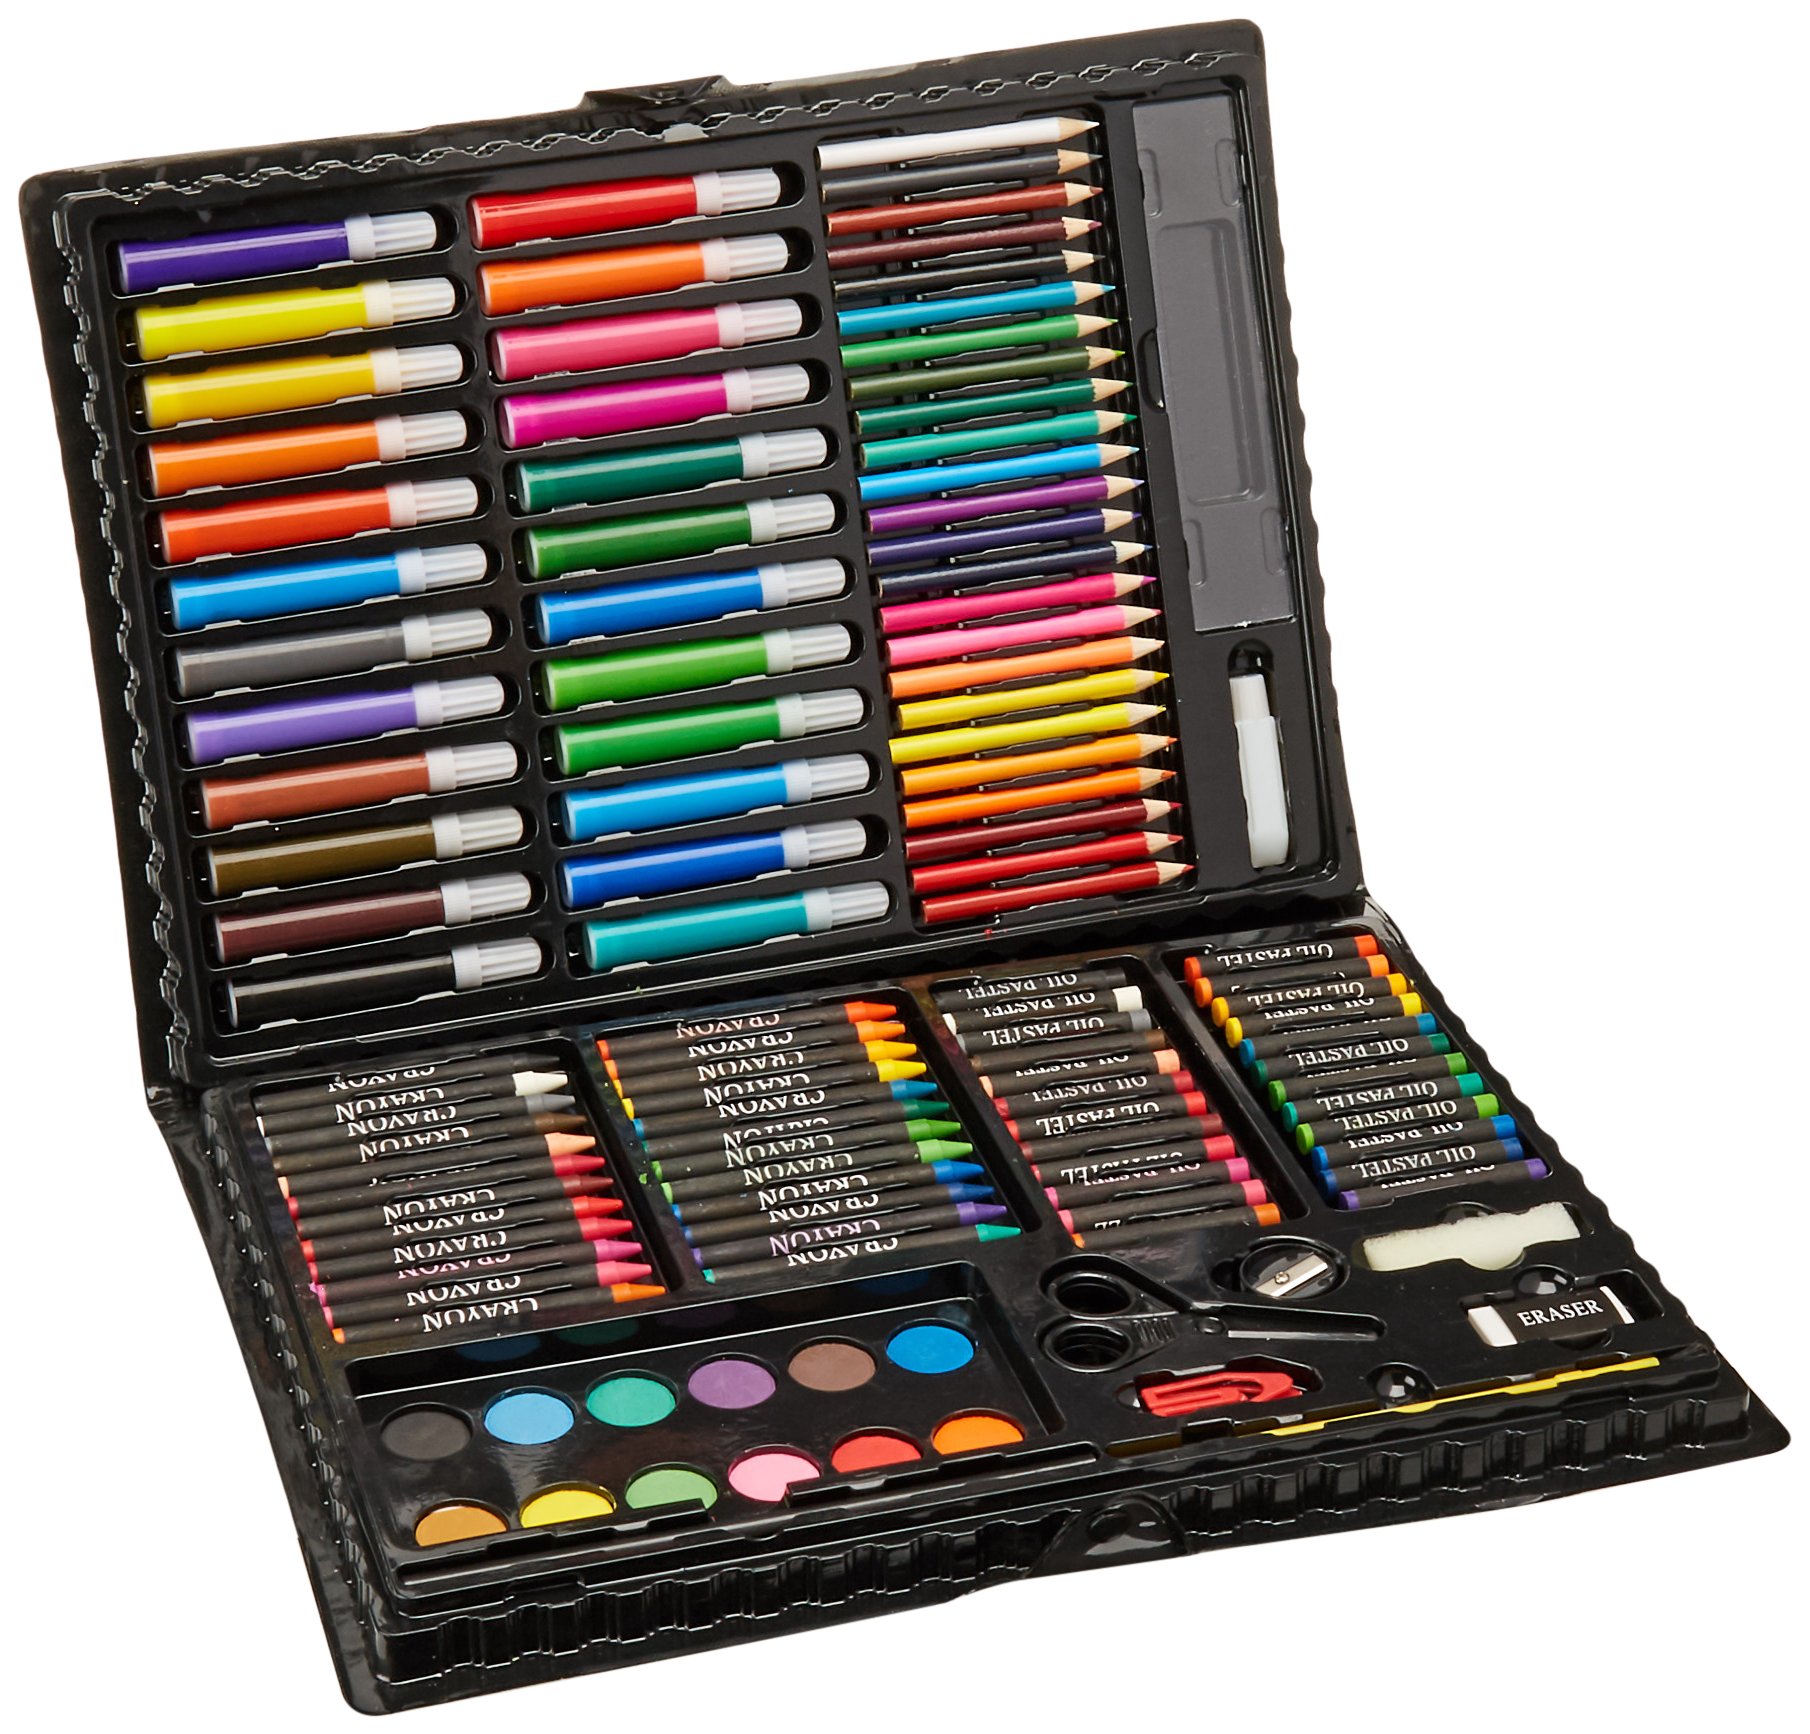 Darice 120-Piece Deluxe Art Set – Art Supplies for Drawing, Painting and More in a Plastic Case - Makes a Great Gift for Children and Adults